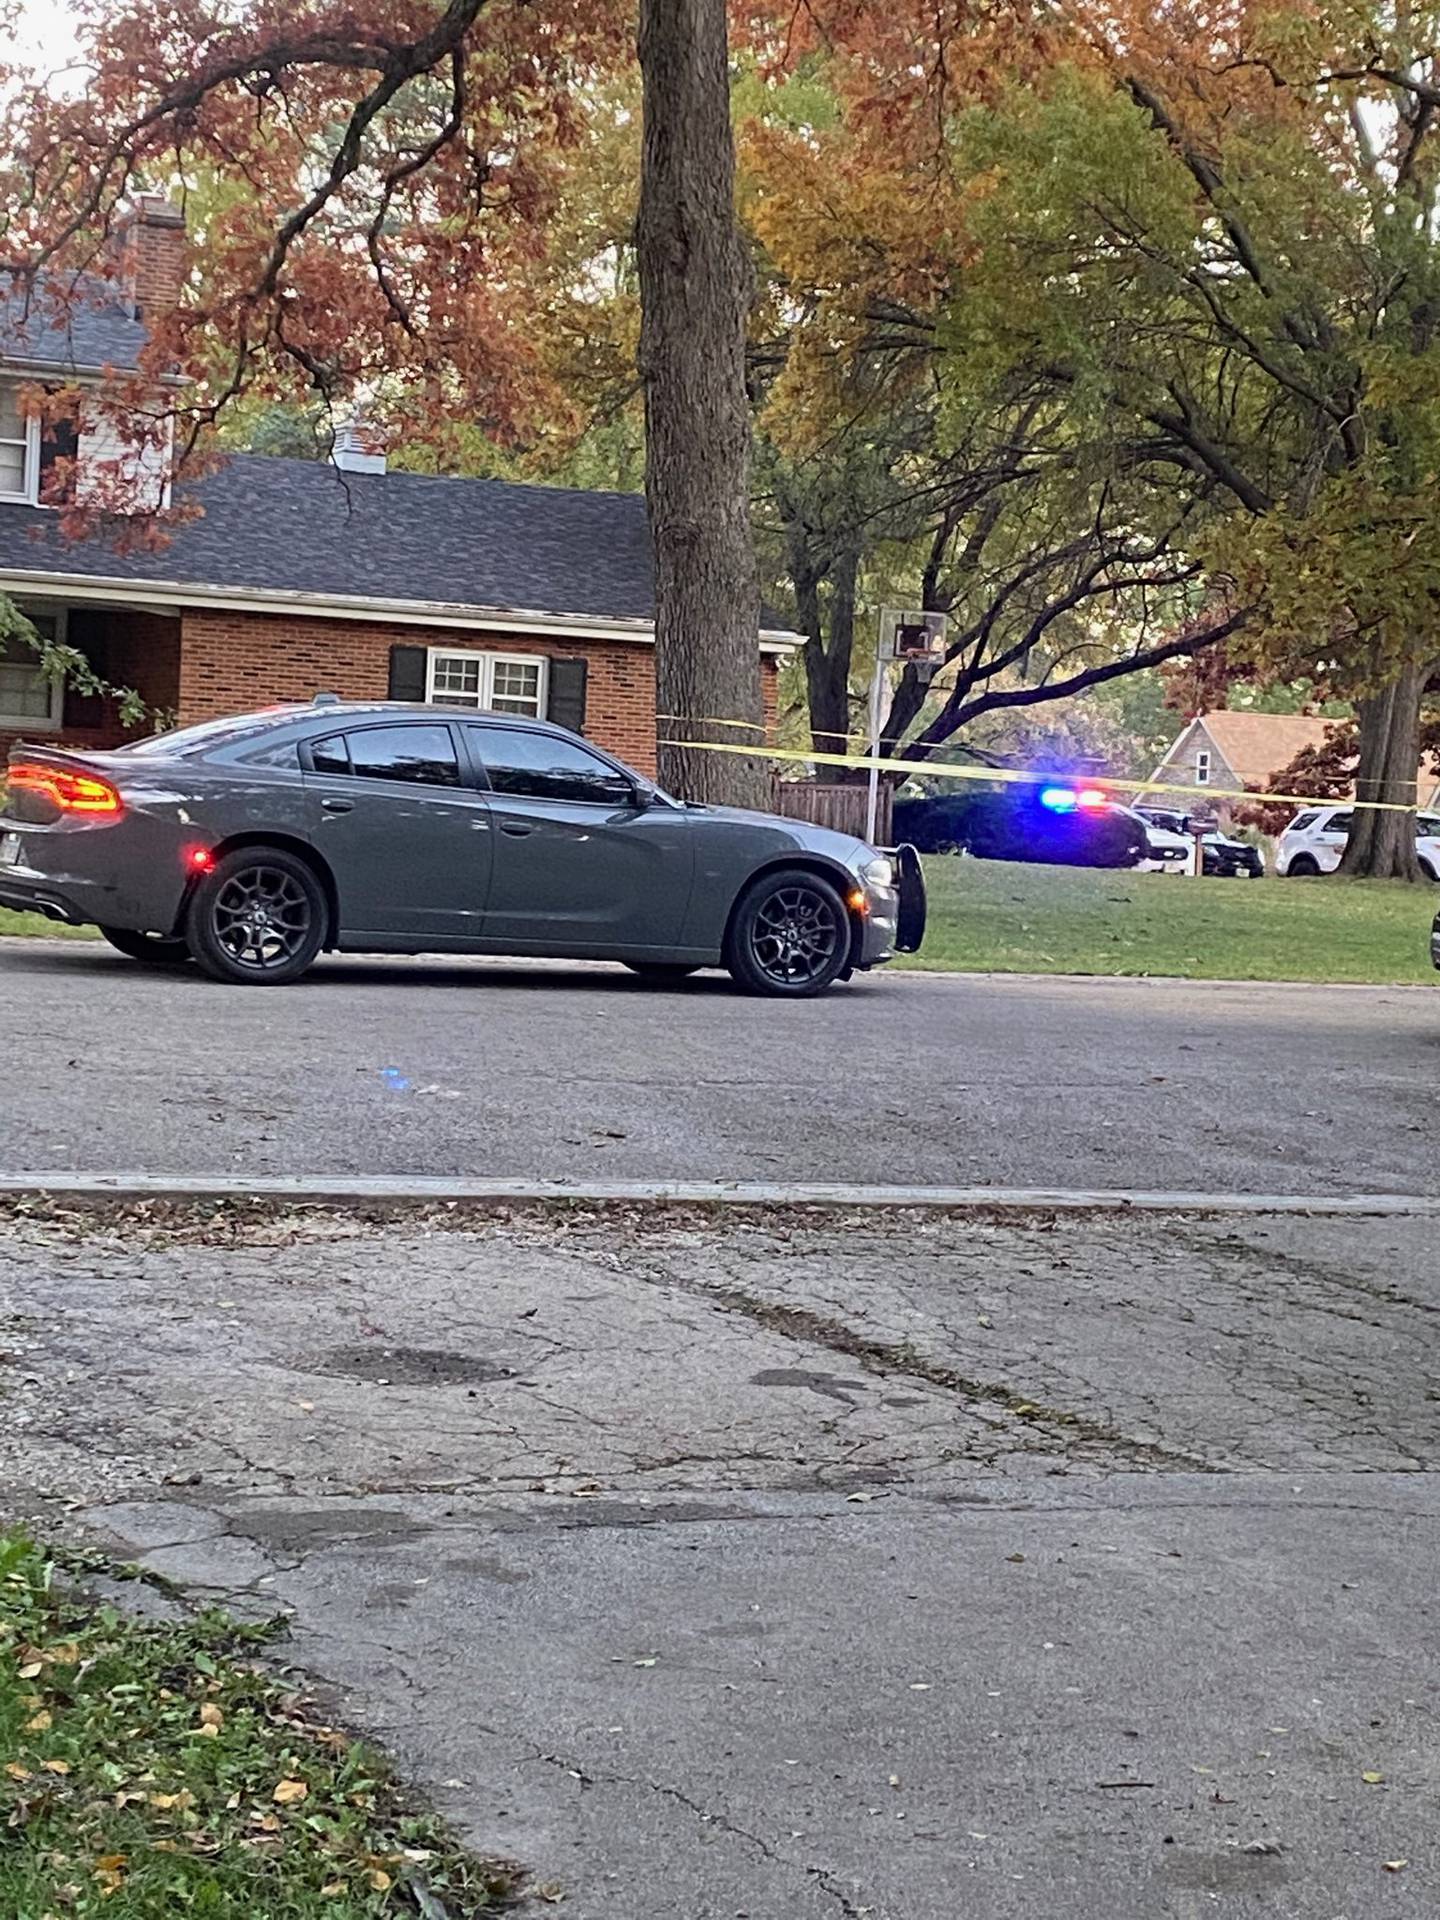 The Will County Sheriff's Office blocked off Middletree Road after deputies gunned down a man as he stabbed his grandfather to death Saturday afternoon, according to police.